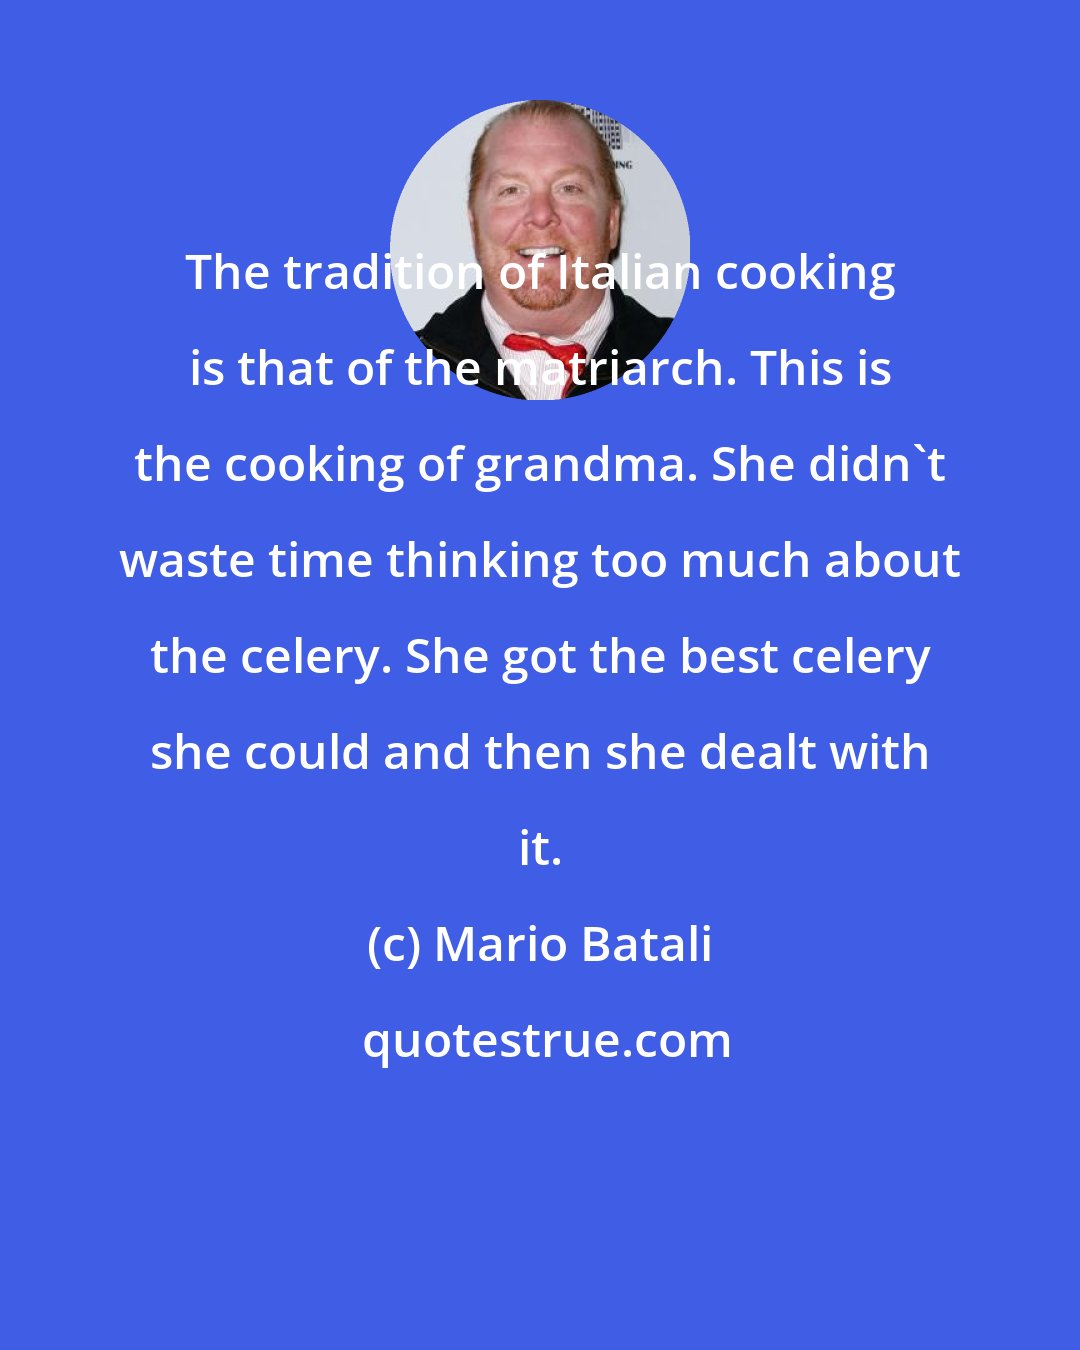 Mario Batali: The tradition of Italian cooking is that of the matriarch. This is the cooking of grandma. She didn't waste time thinking too much about the celery. She got the best celery she could and then she dealt with it.